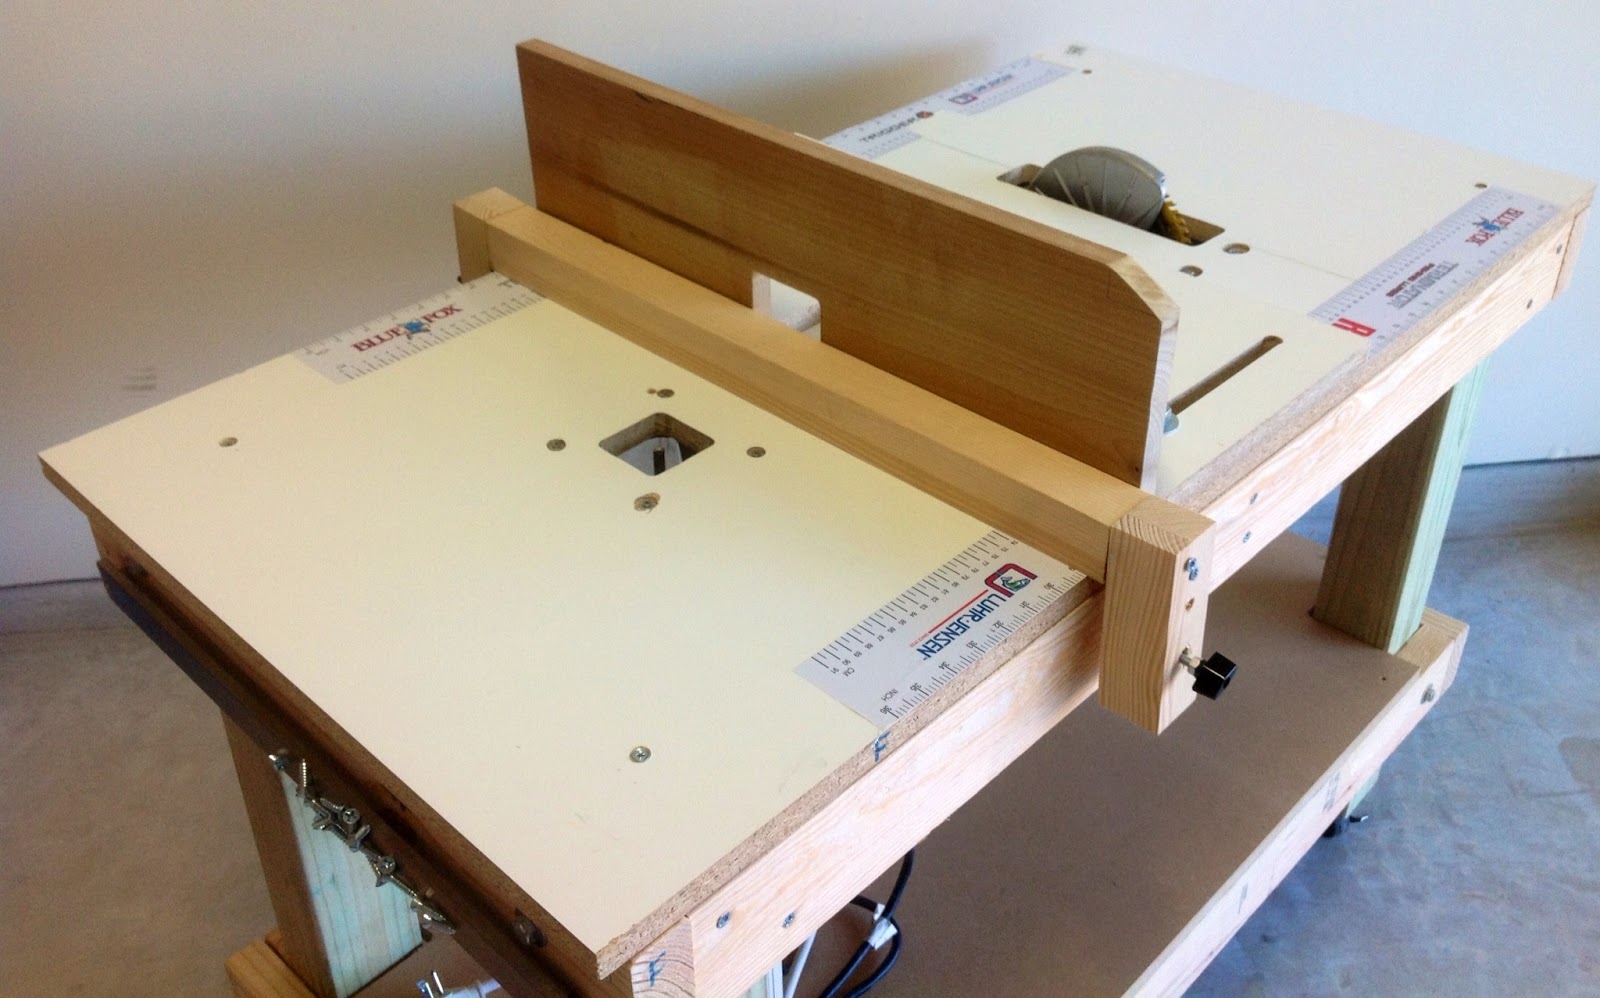 Thinking Wood: Project 2 - DIY Portable 3-in-1 Workbench / Table Saw 